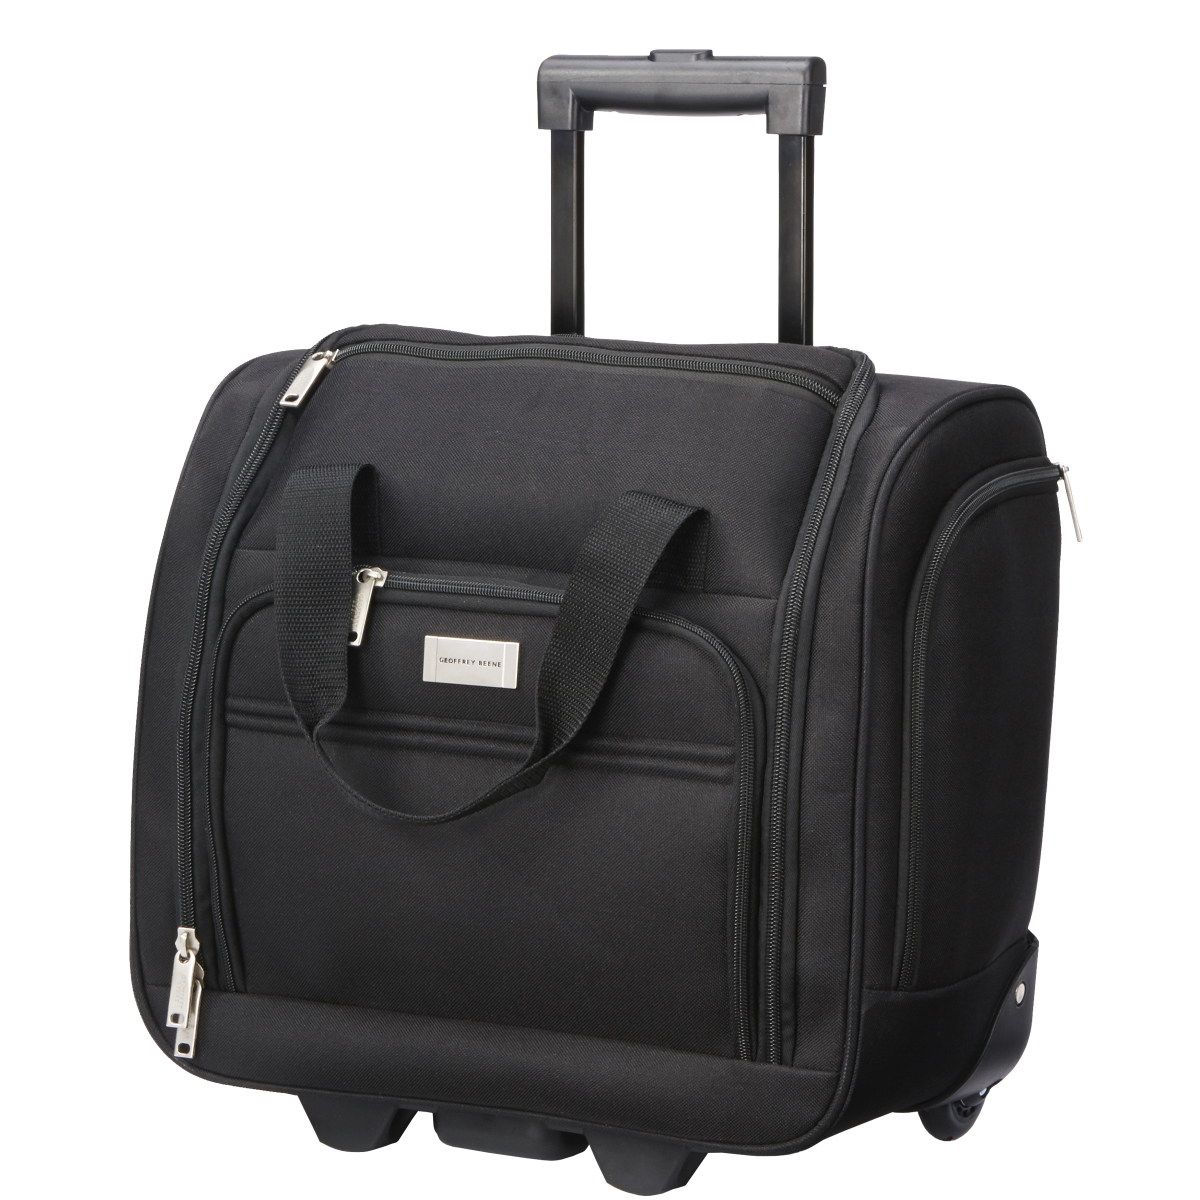 Gb1390-16 16 In. Underseater Travel Carry-on Bag, Black